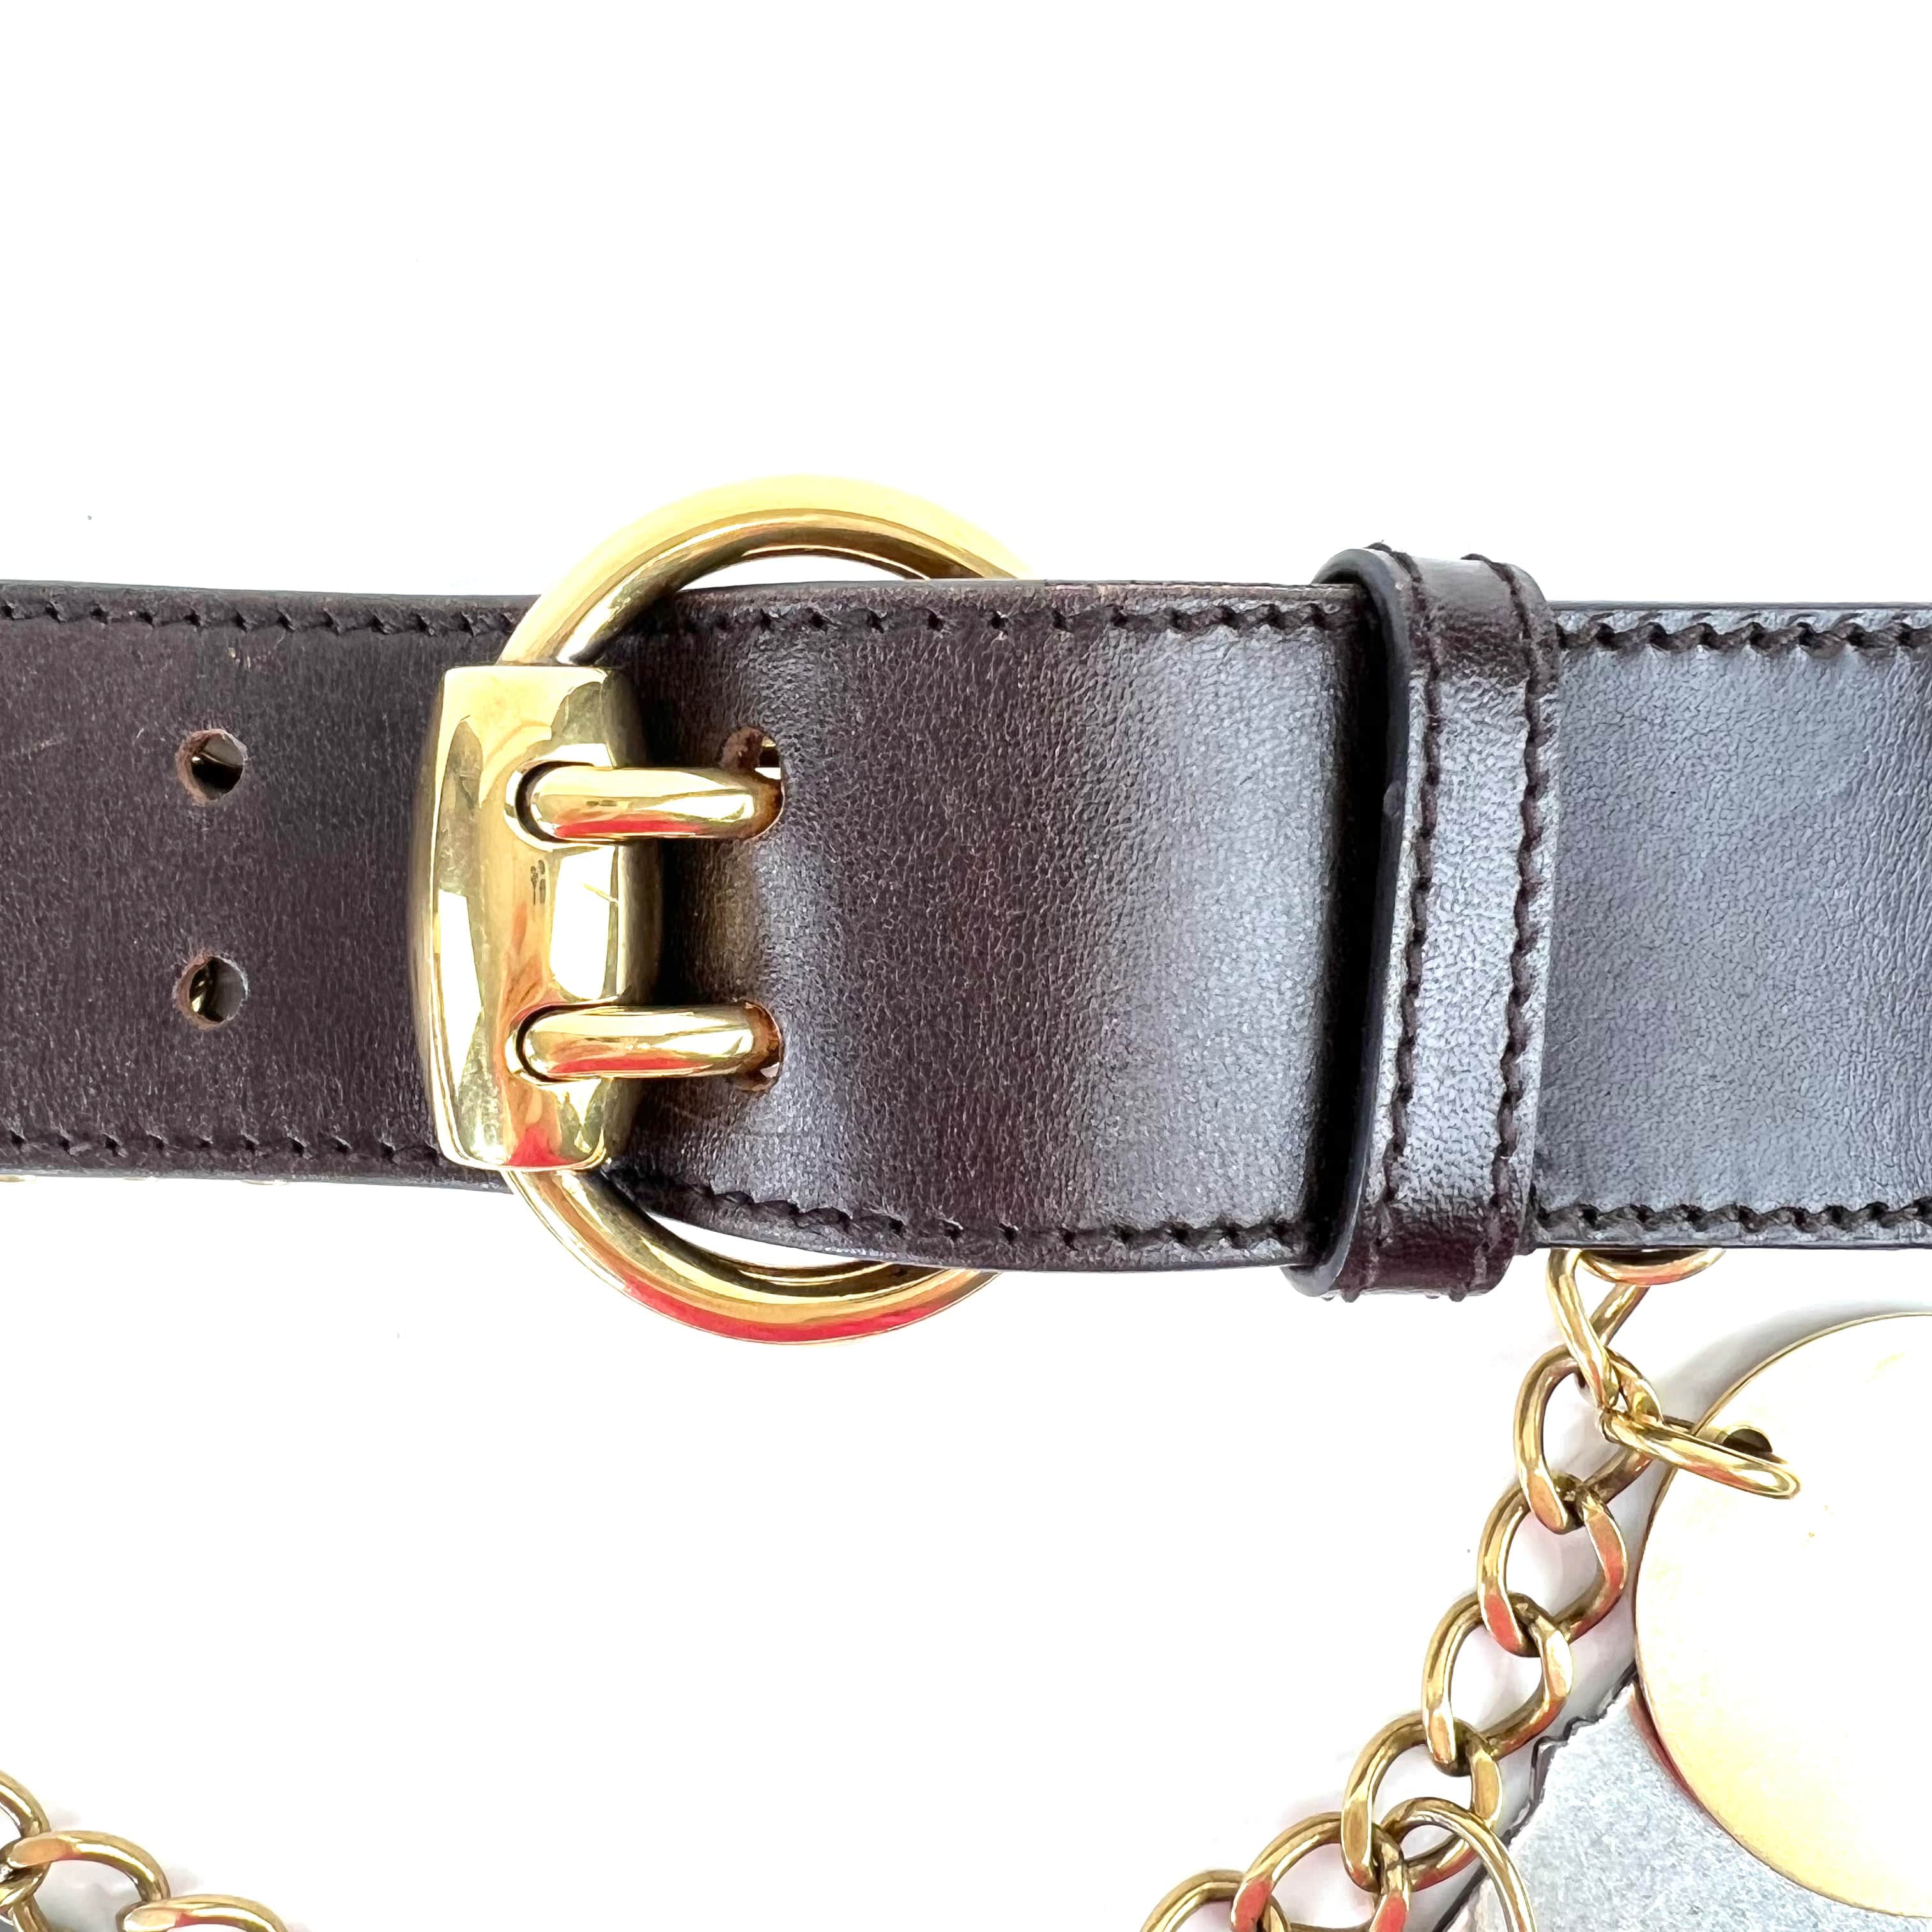 Cheap Gucci belts: our guide to saving money on the must-have accessory